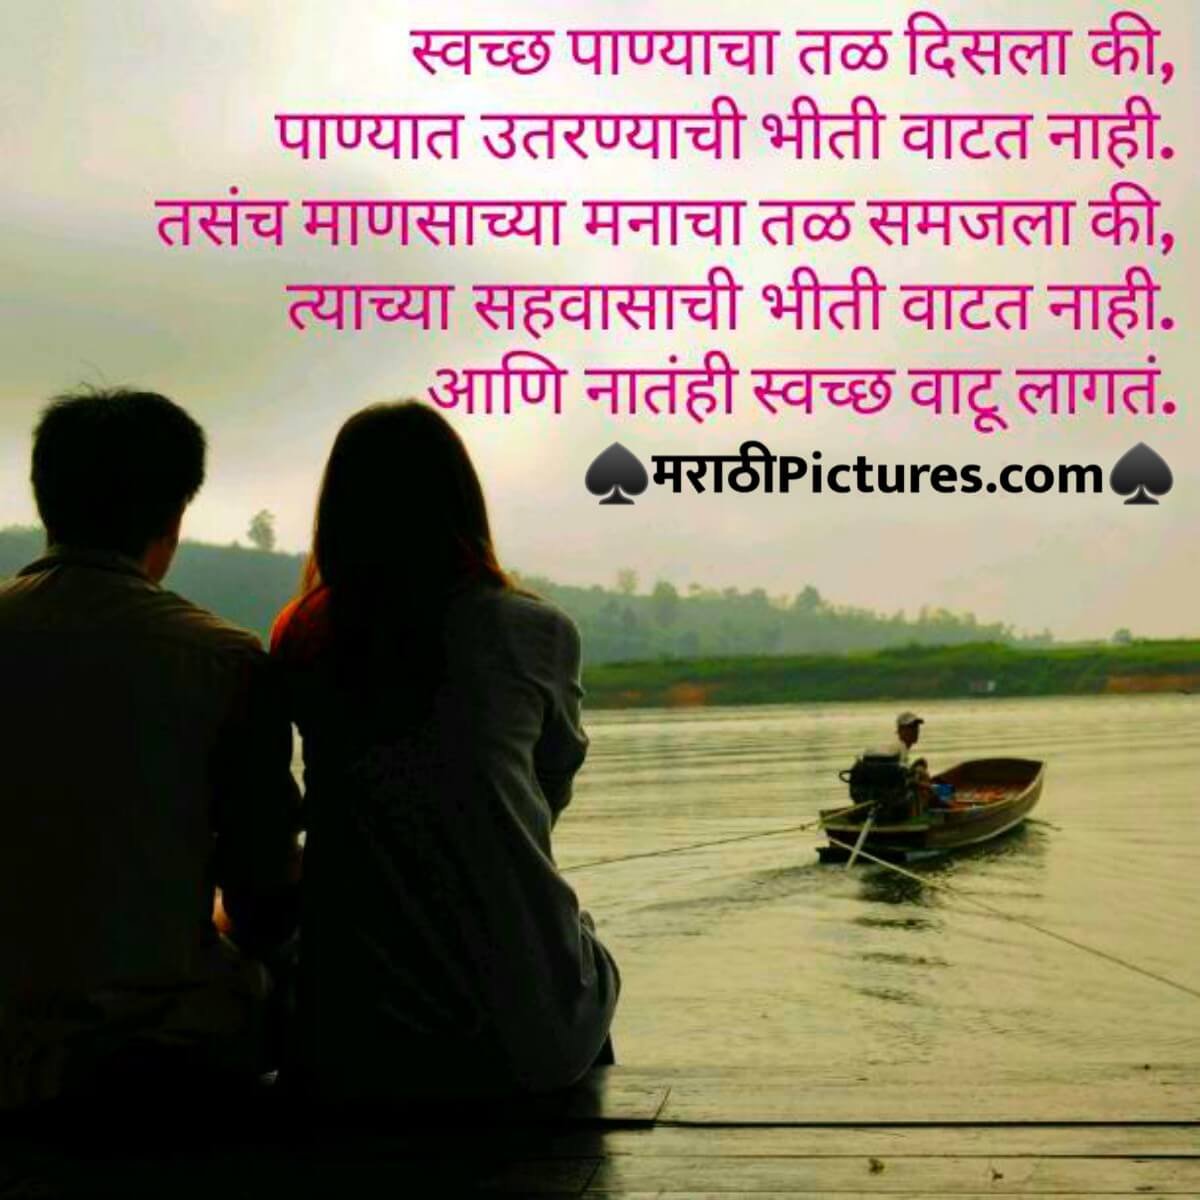 Marathi Love Quotes thoughts images - MarathiPictures.com